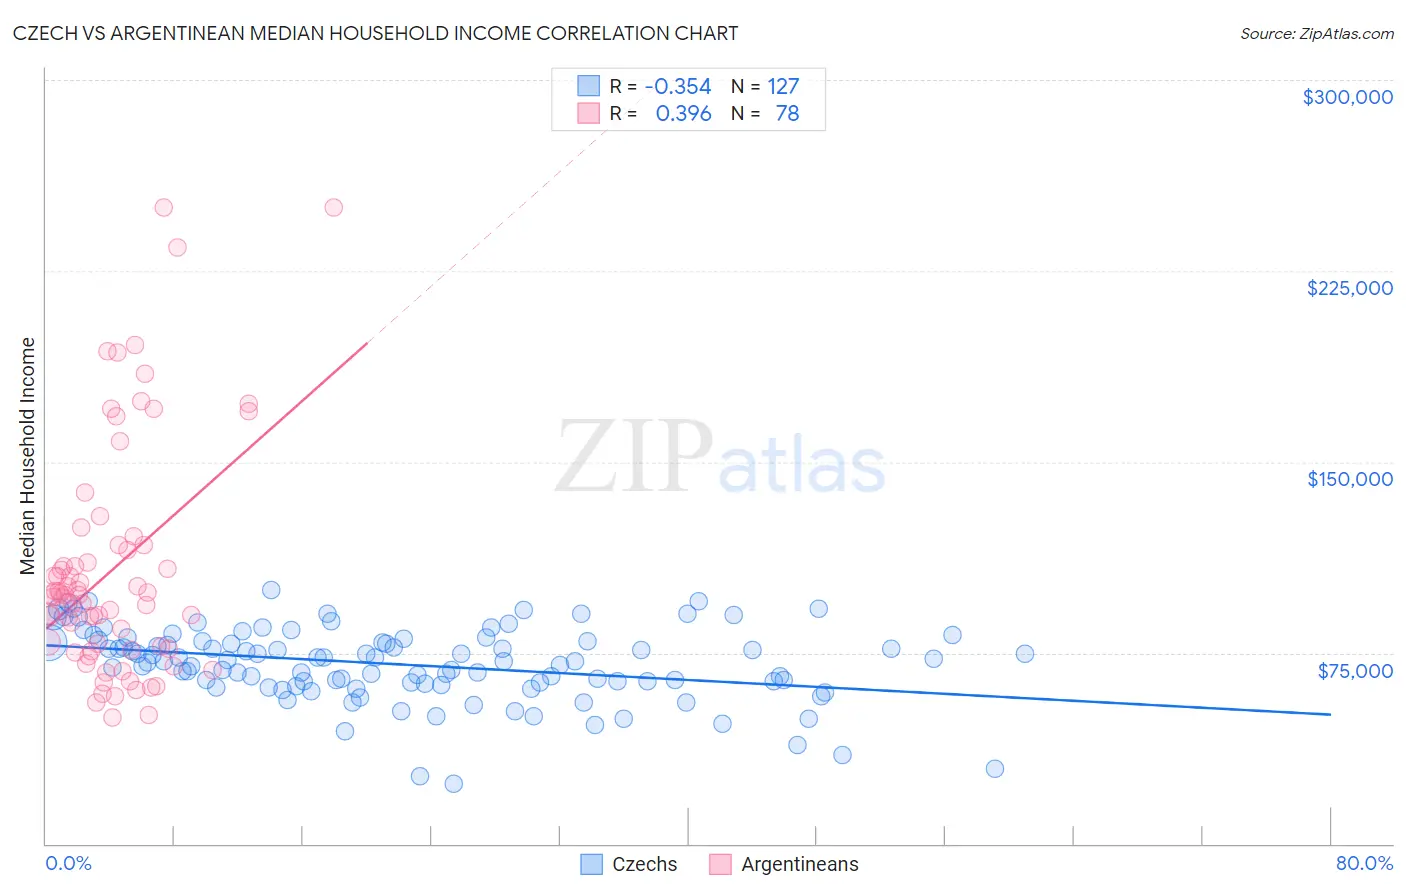 Czech vs Argentinean Median Household Income